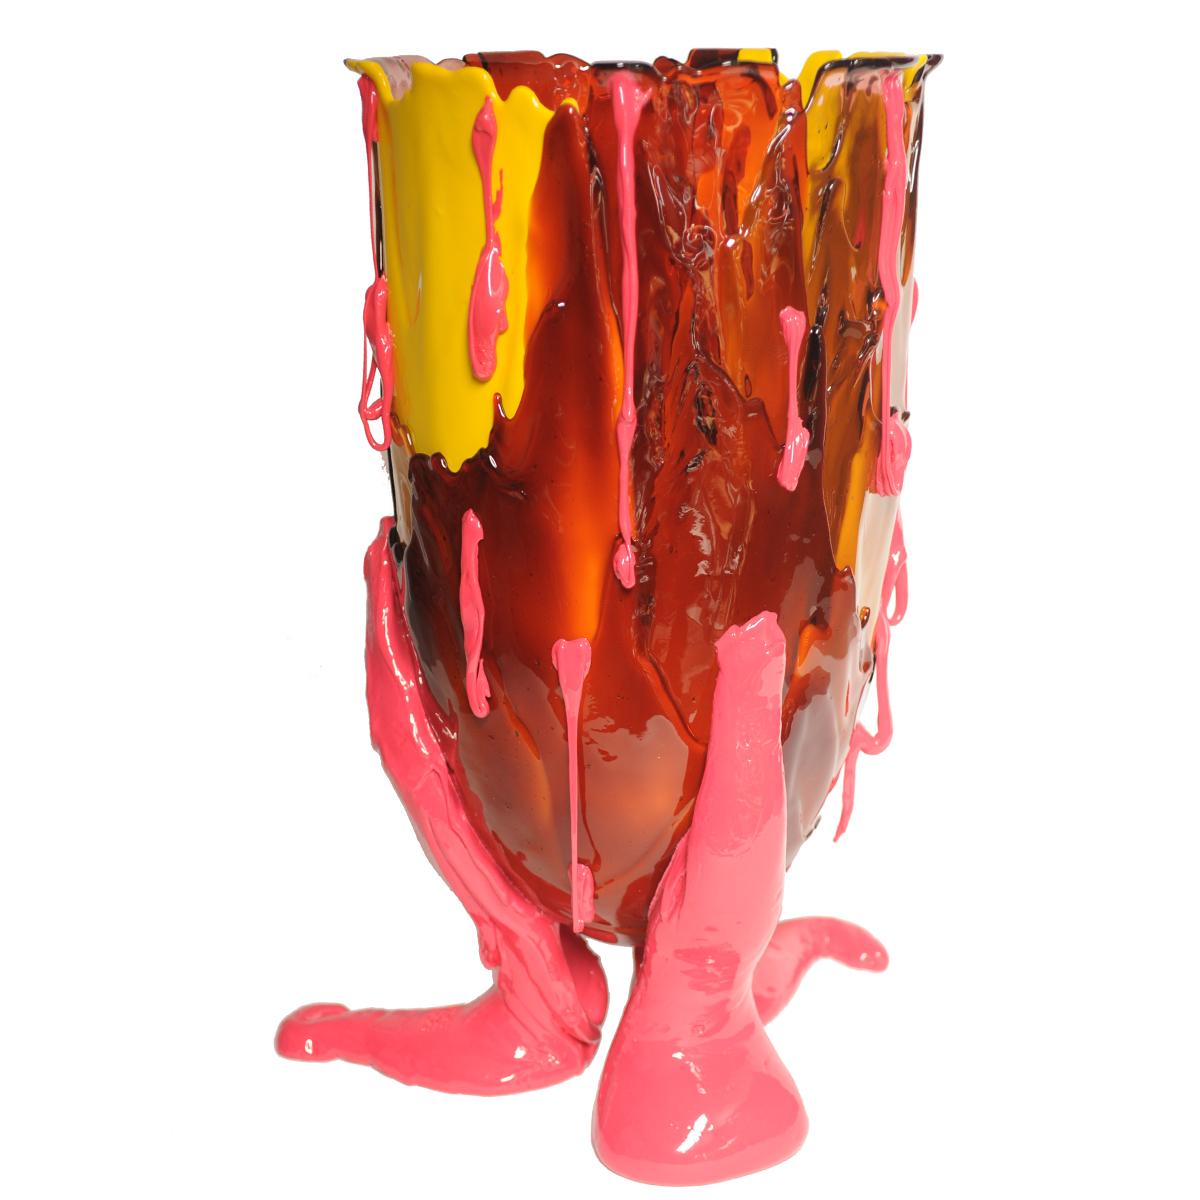 Italian Gaetano Pesce Clear Special XL Vase Resin Yellow, Ruby, Pink, Fuchsia For Sale